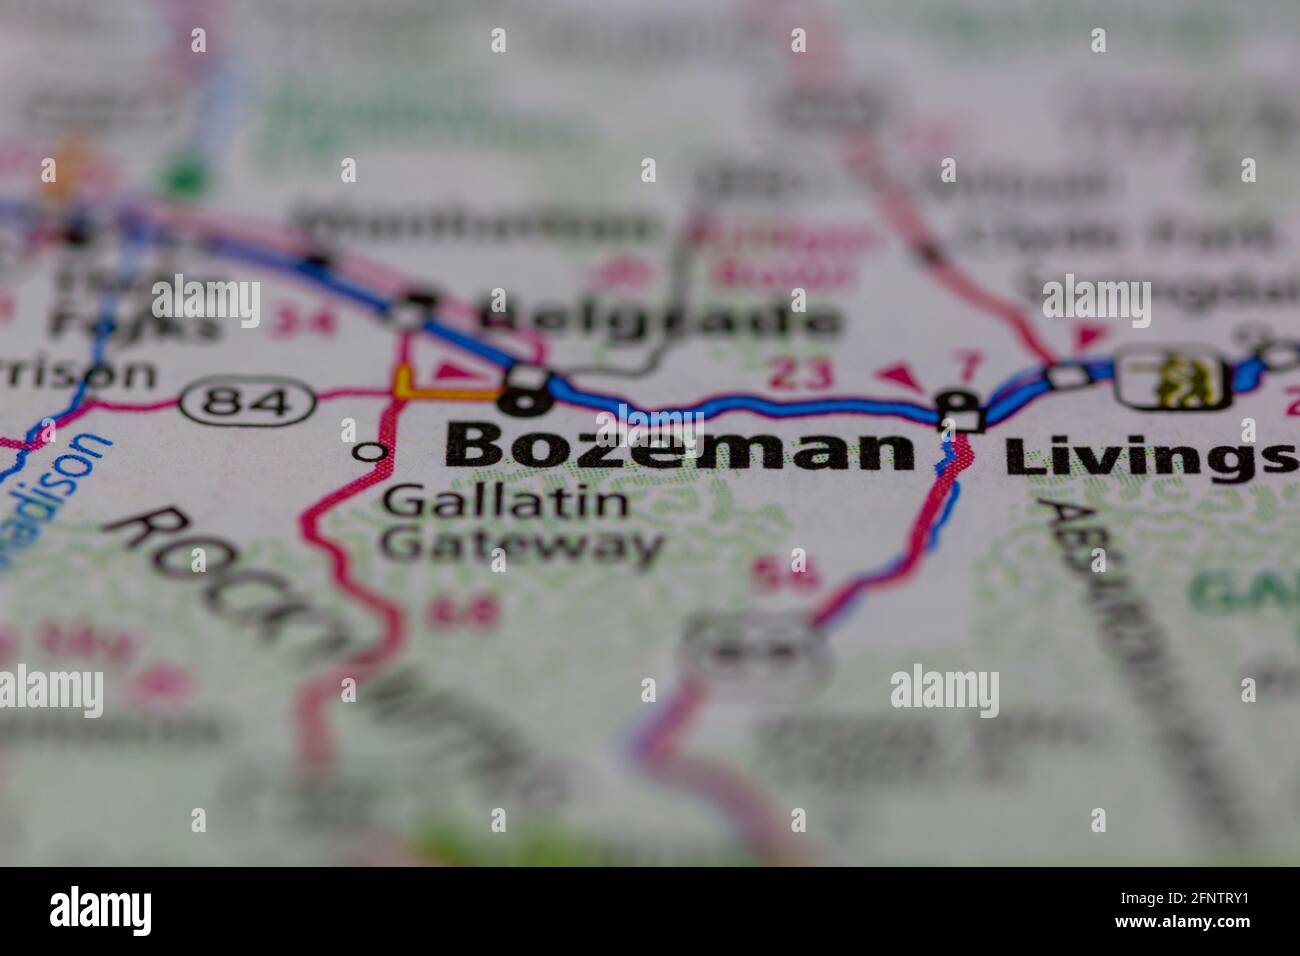 Bozeman Montana USA shown on a Geography map or road map Stock Photo